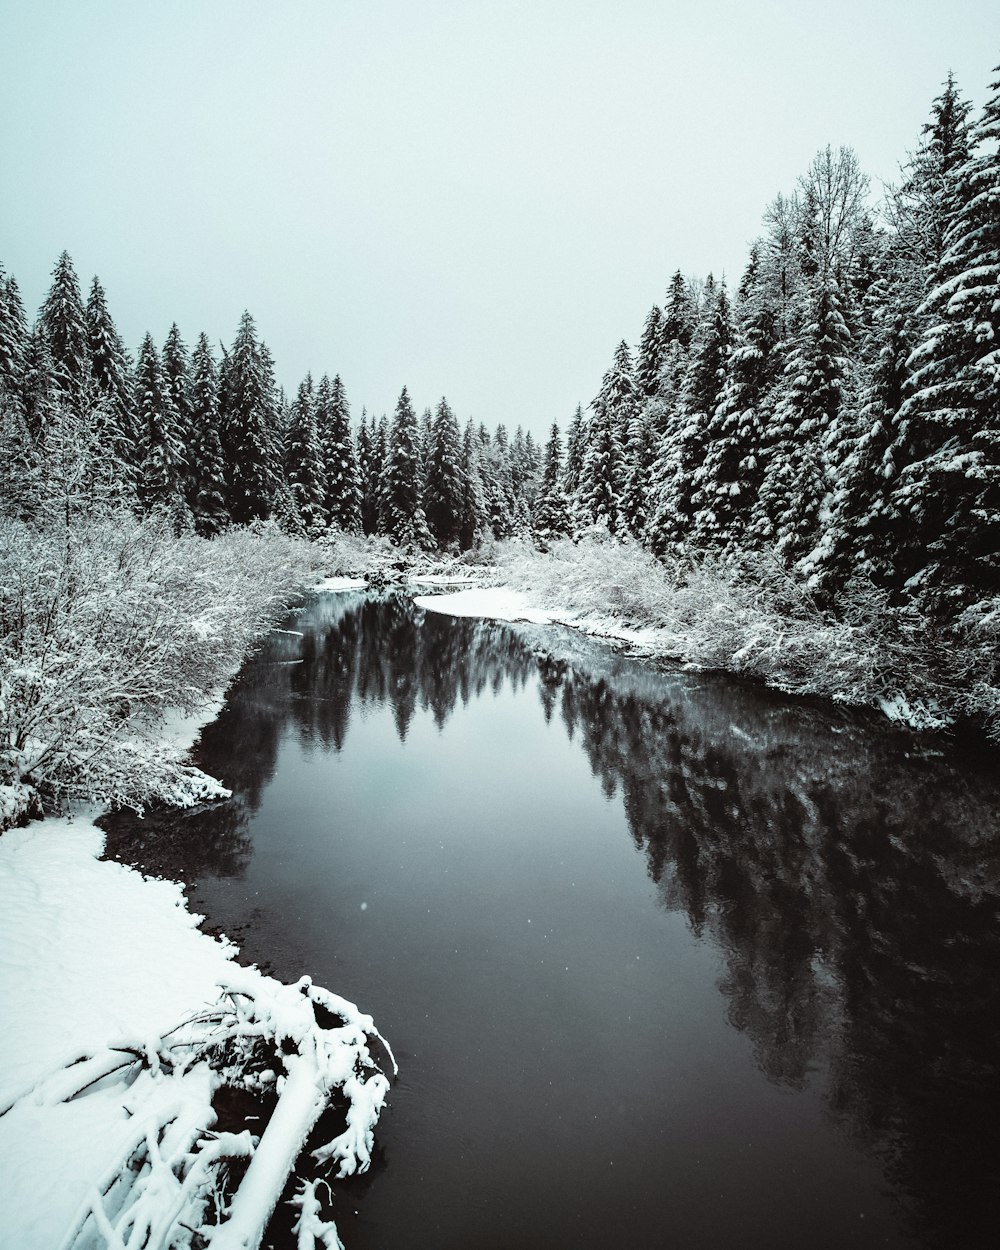 snow covered trees and river